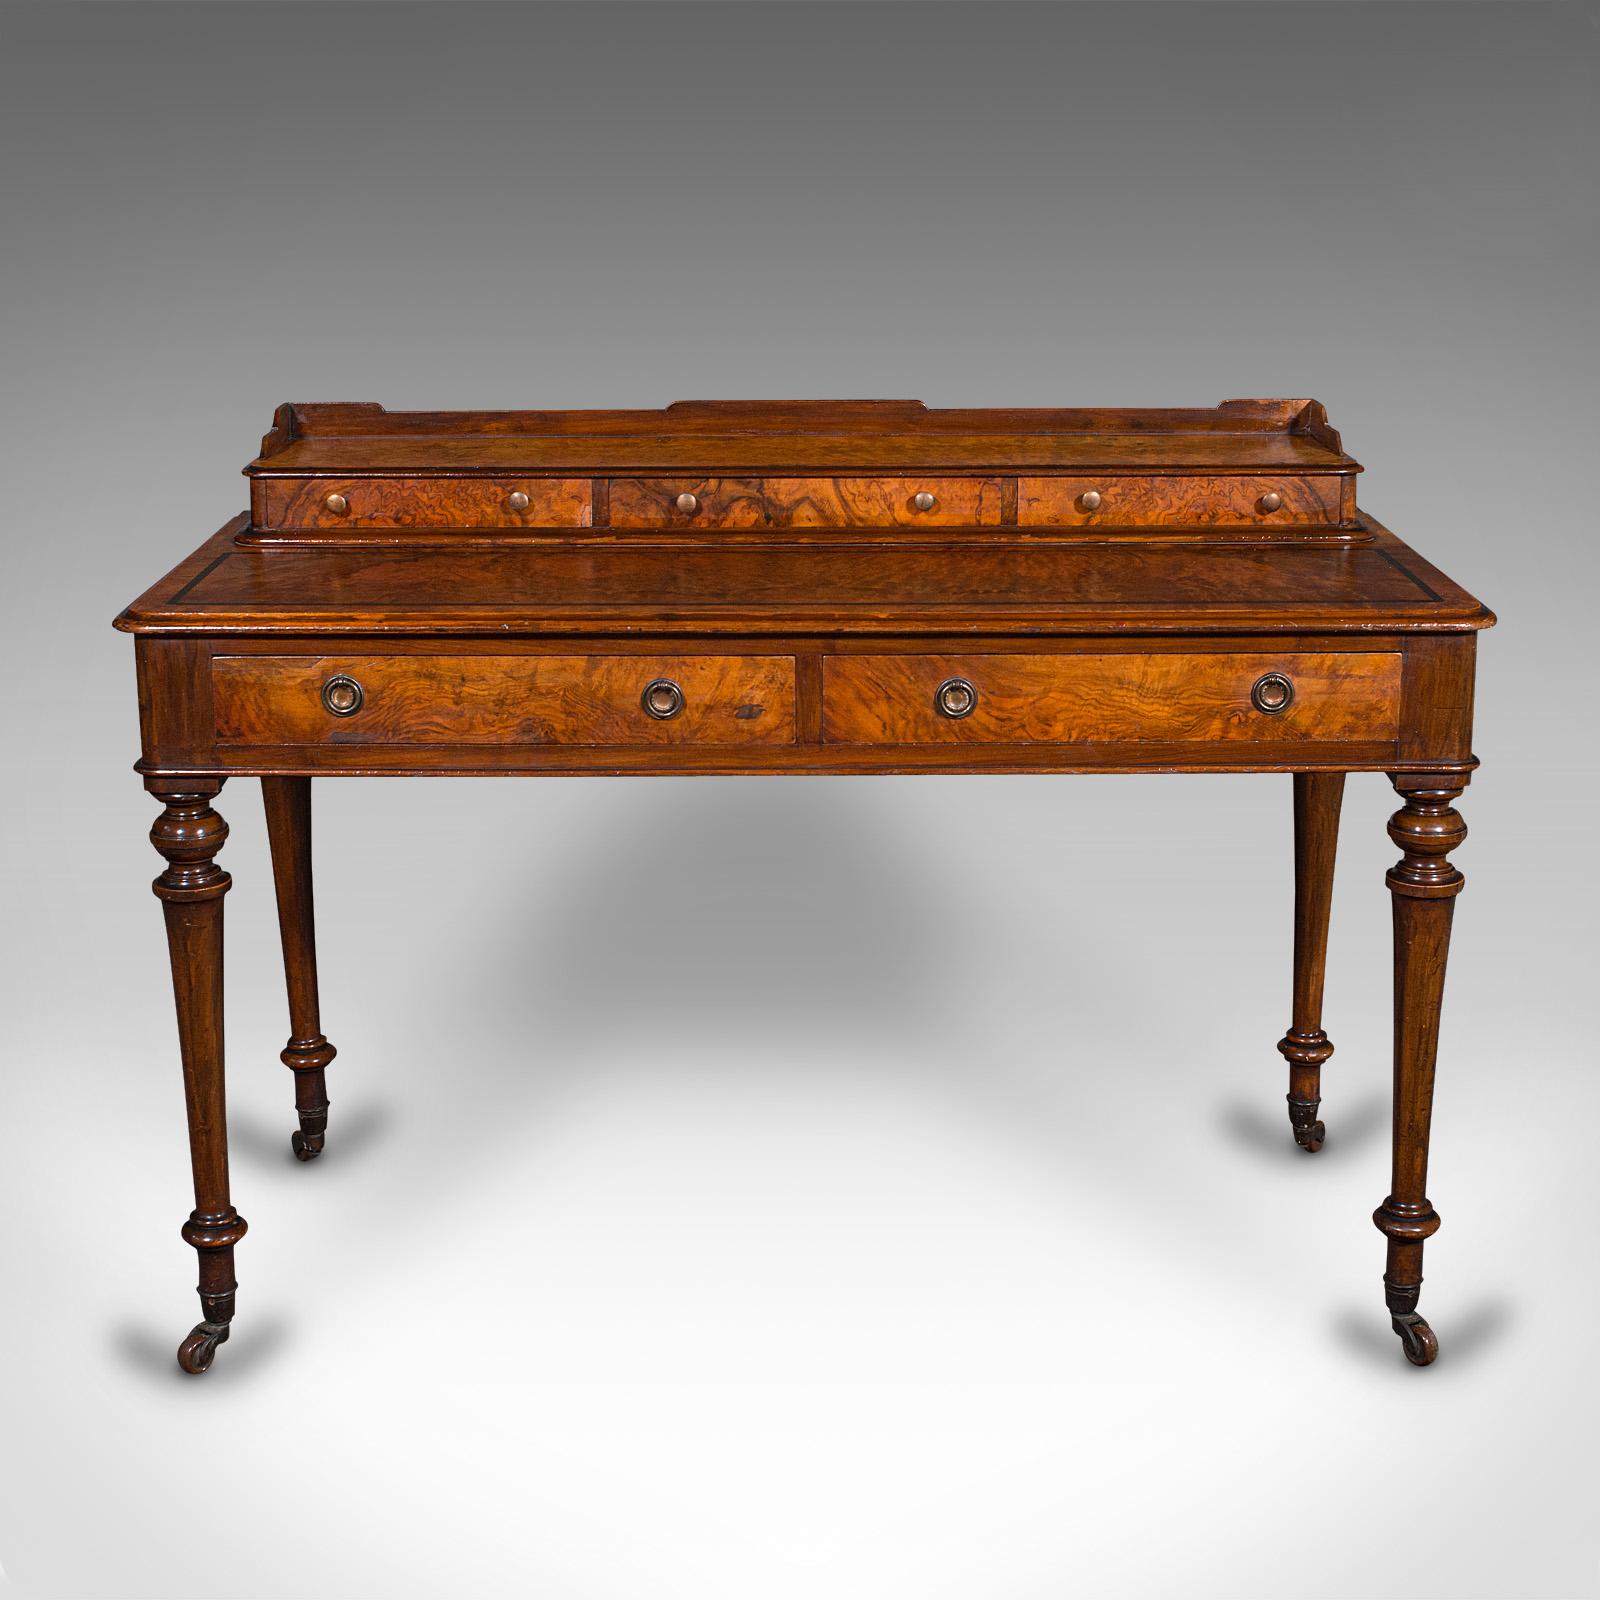 This is an antique writing desk. An English, burr walnut correspondence table, dating to the mid Victorian period, circa 1860.

The essence of mid Victorian elegance with strikingly figured appearance
Displays a desirable aged patina and in good